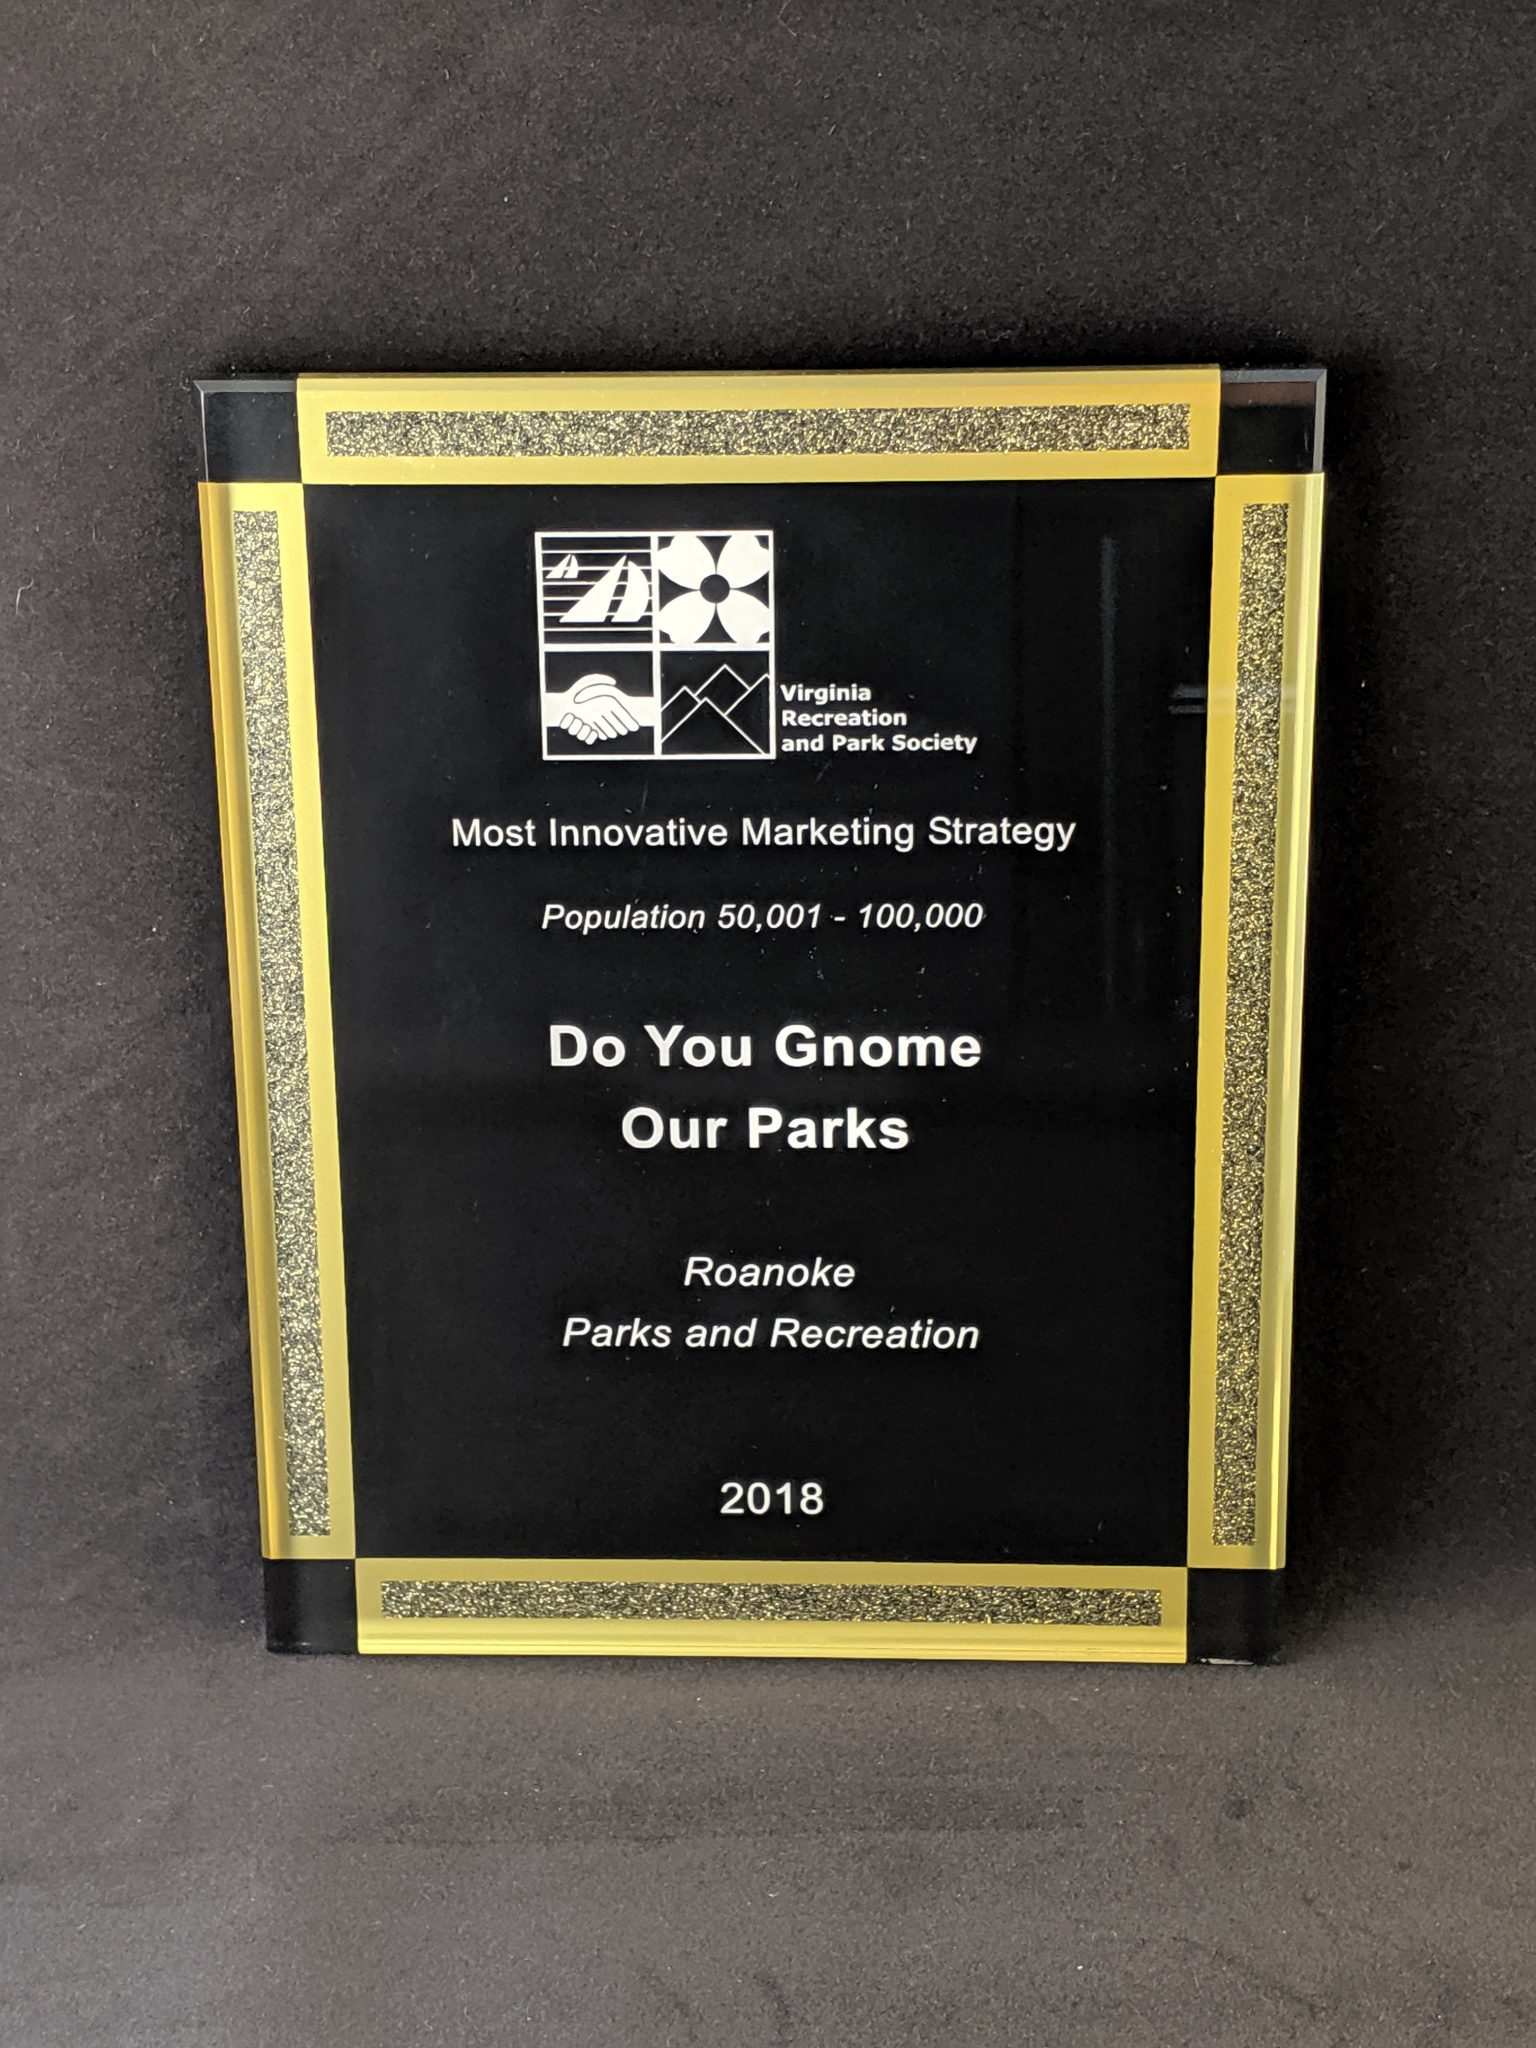 Plaque recognizing Roanoke Parks and Recreation for Innovative Marketing Strategy for "Do You Gnome Our Parks" program.